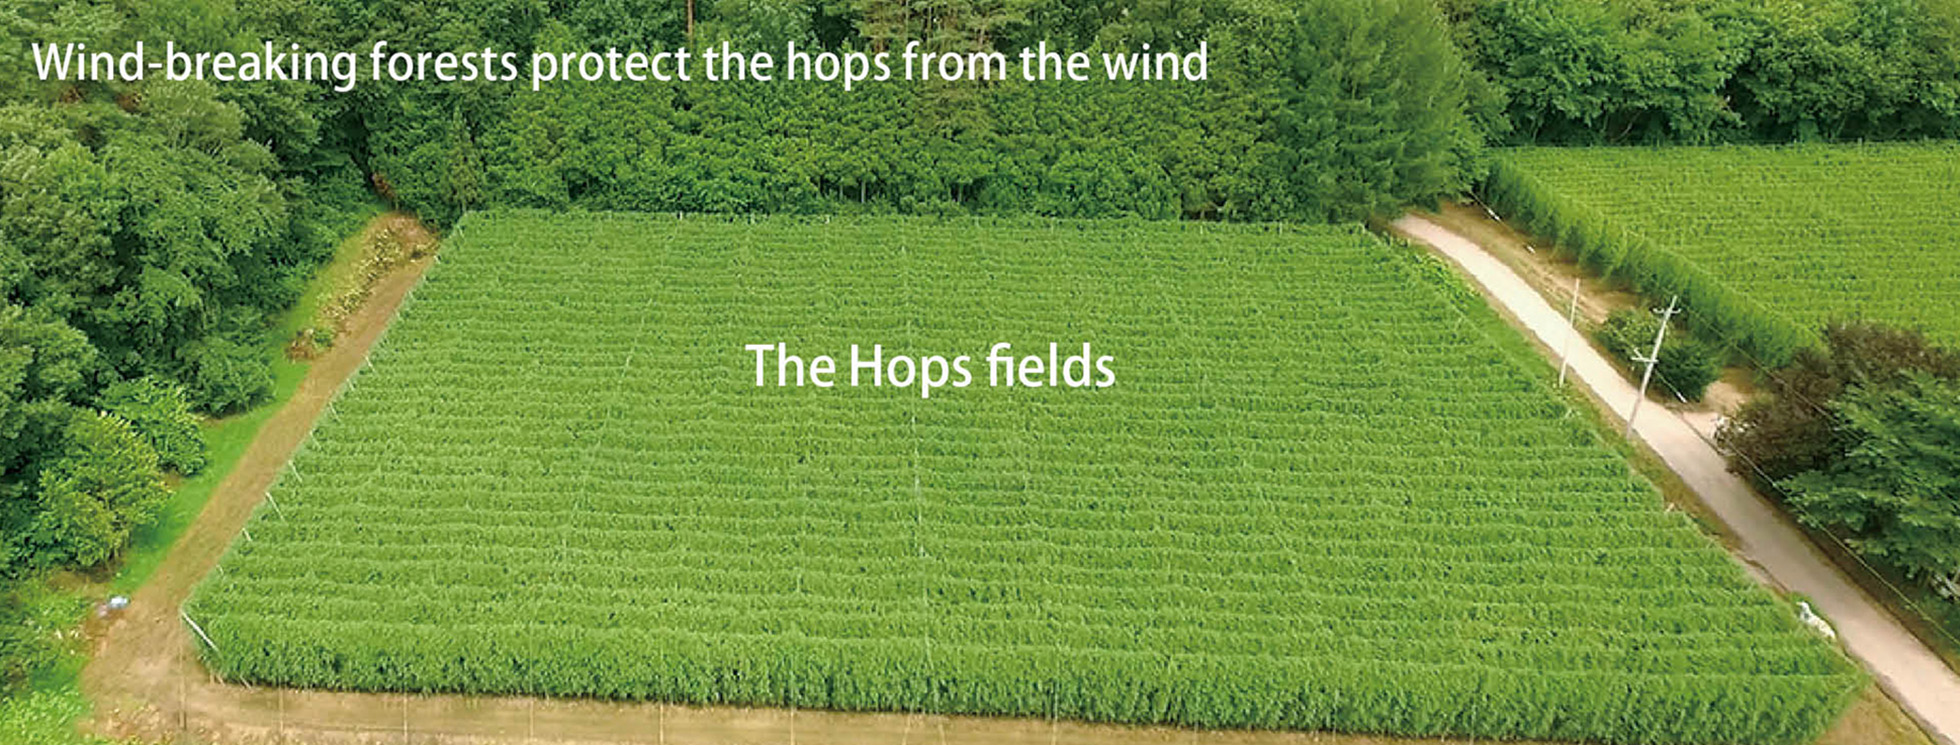 Diverse forms of life inhabit the wind-breaking forests planted to protect the hops and the underbrush planted to prevent drying of the ground.